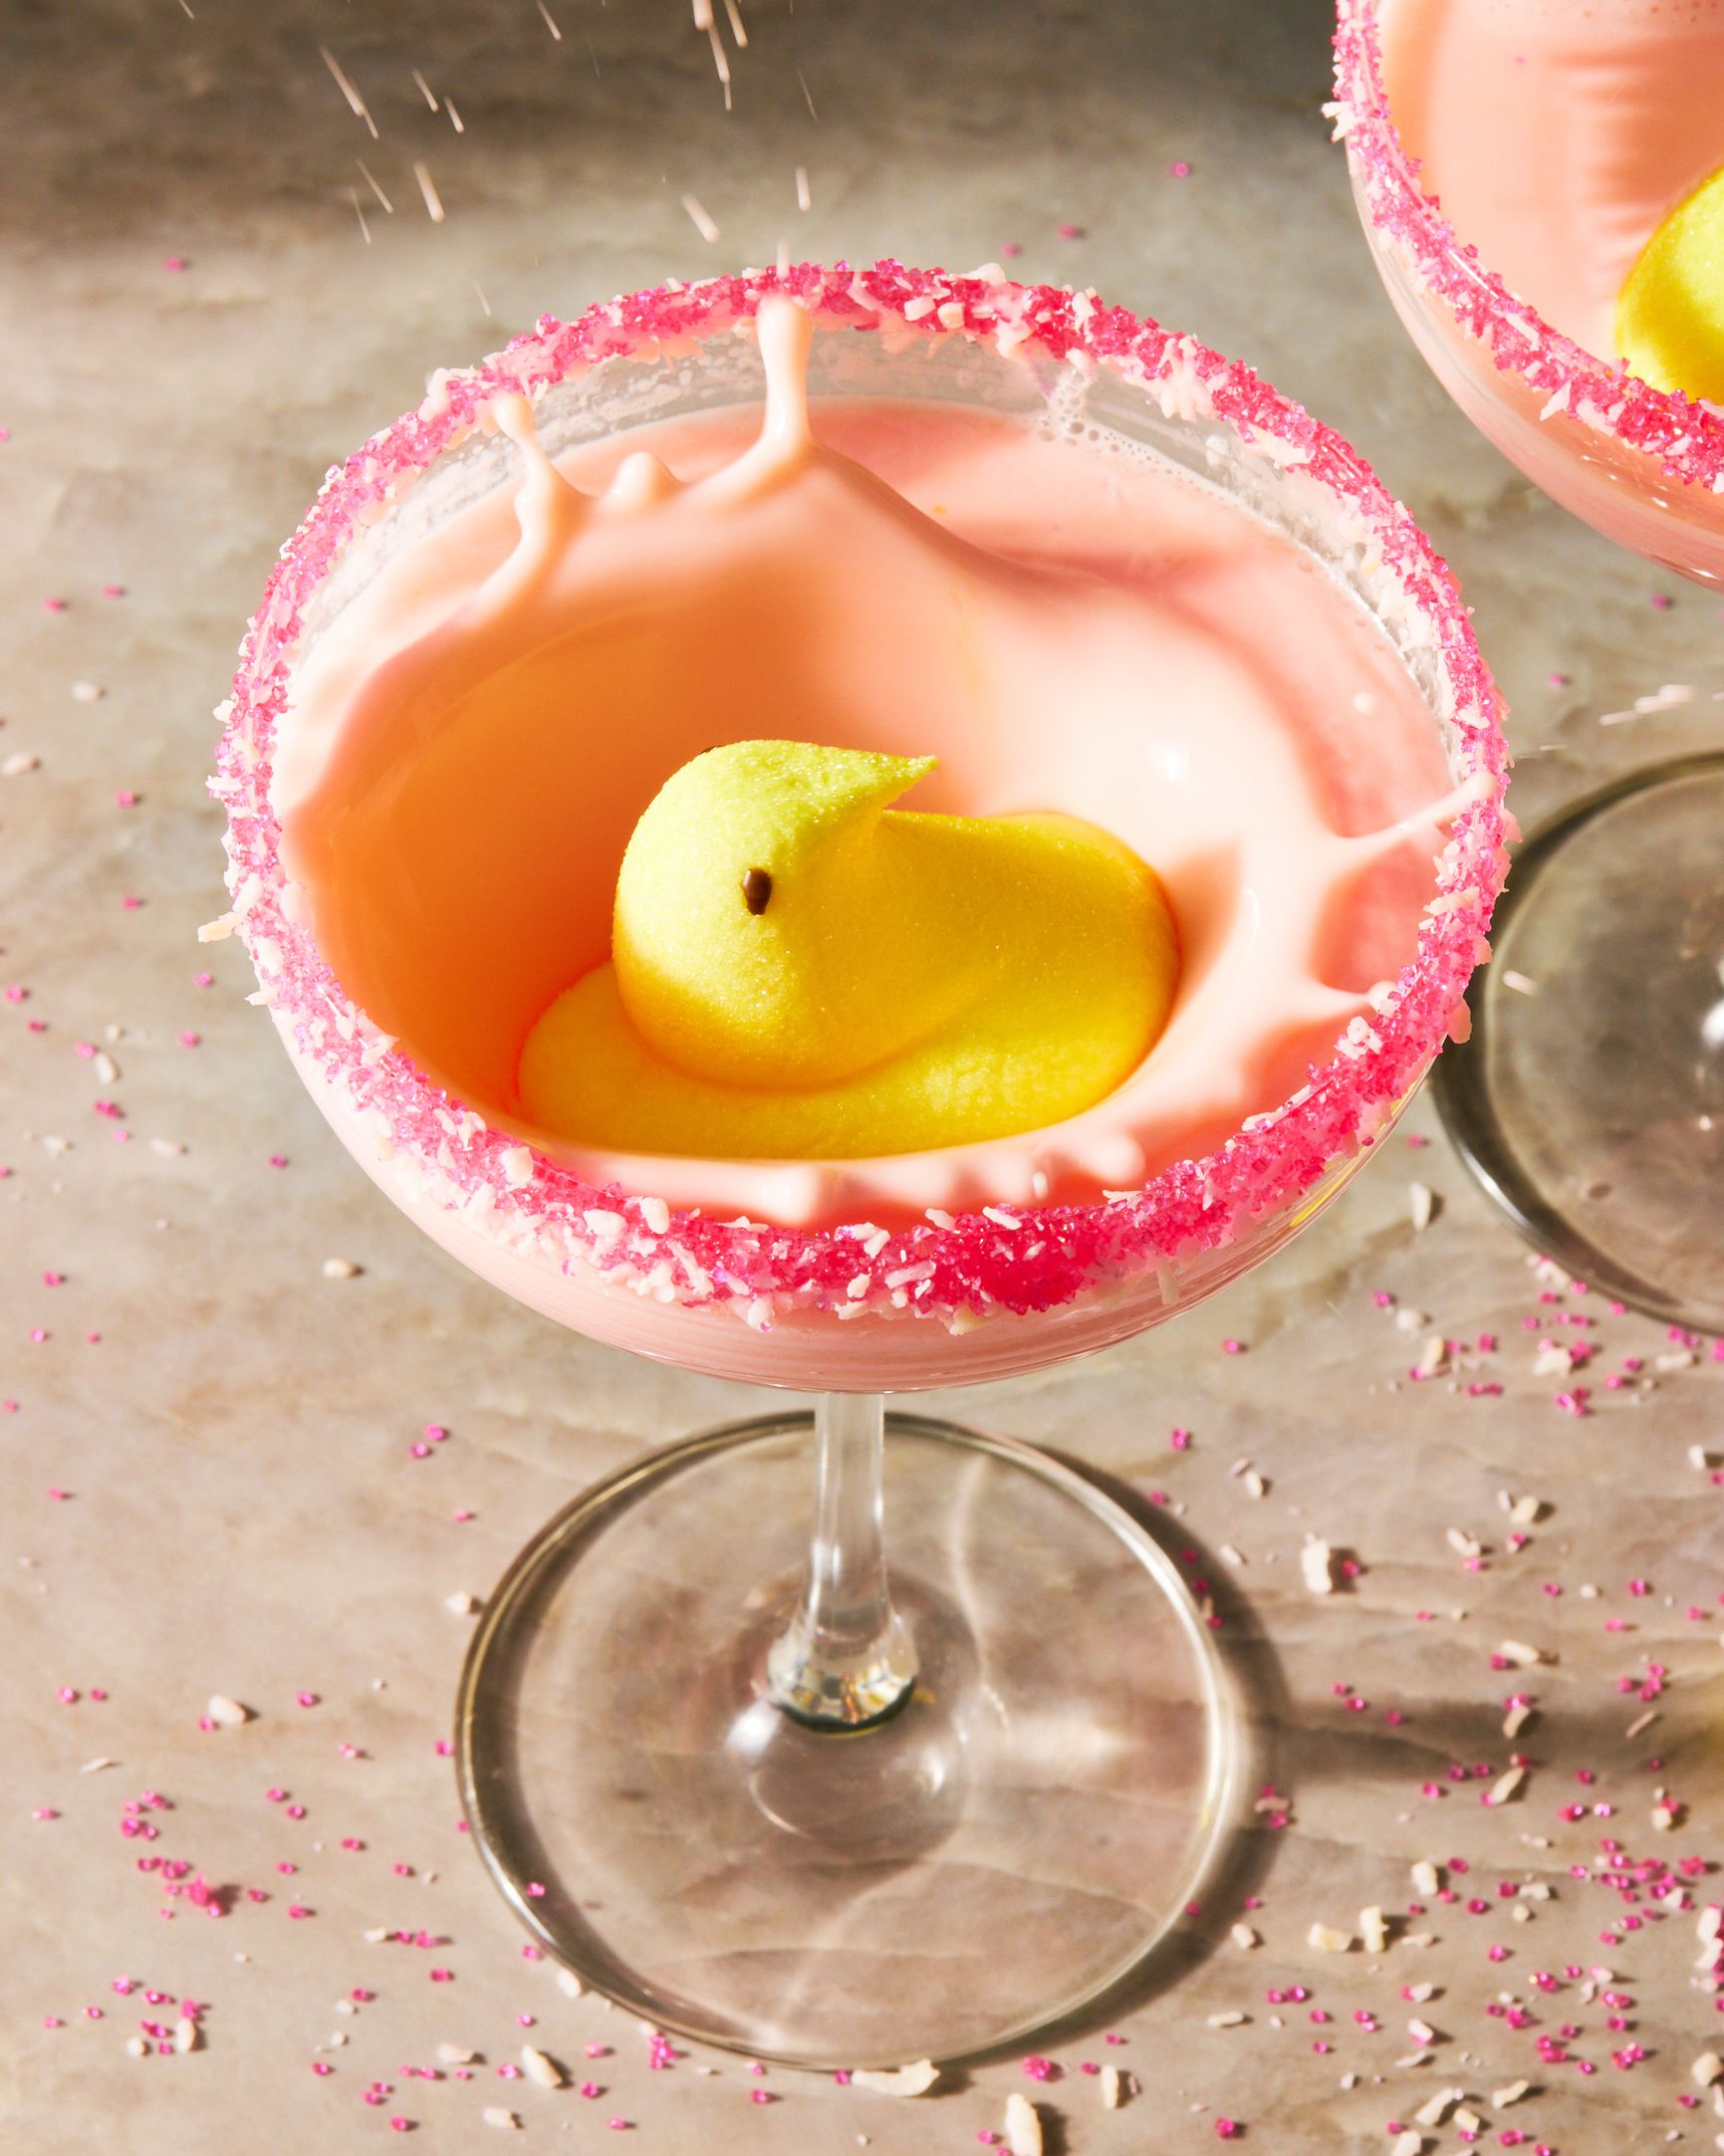 16 Easter Drinks - Fun Easter Party Cocktail Pitcher Recipes